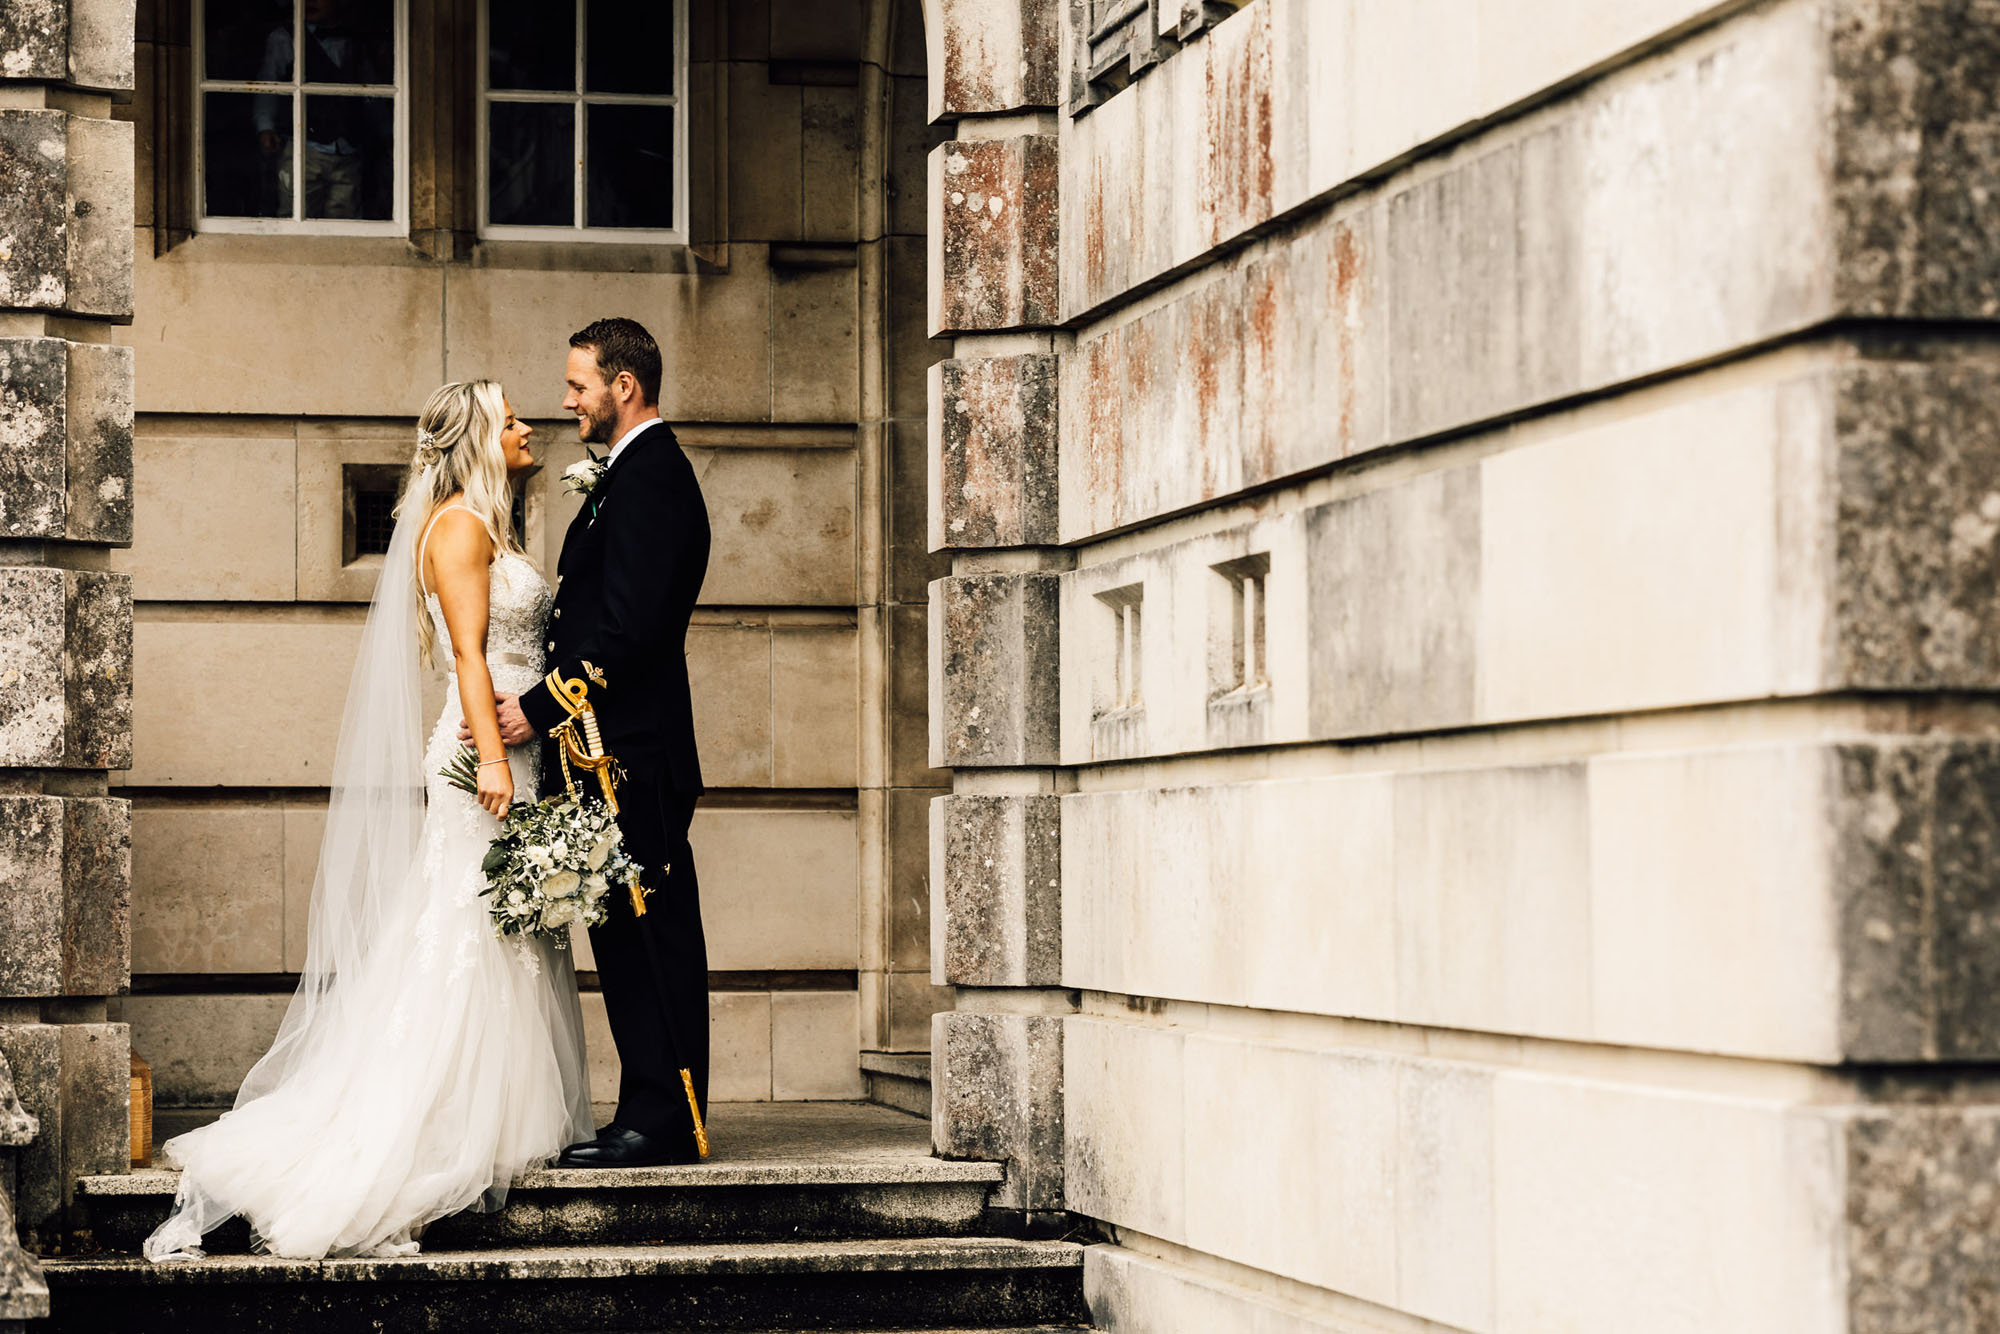 A bride and groom embrace on the steps of a classic wedding venue. He's in full military dress and she's in a white dress. By Chris Armstrong Photography in Cornwall